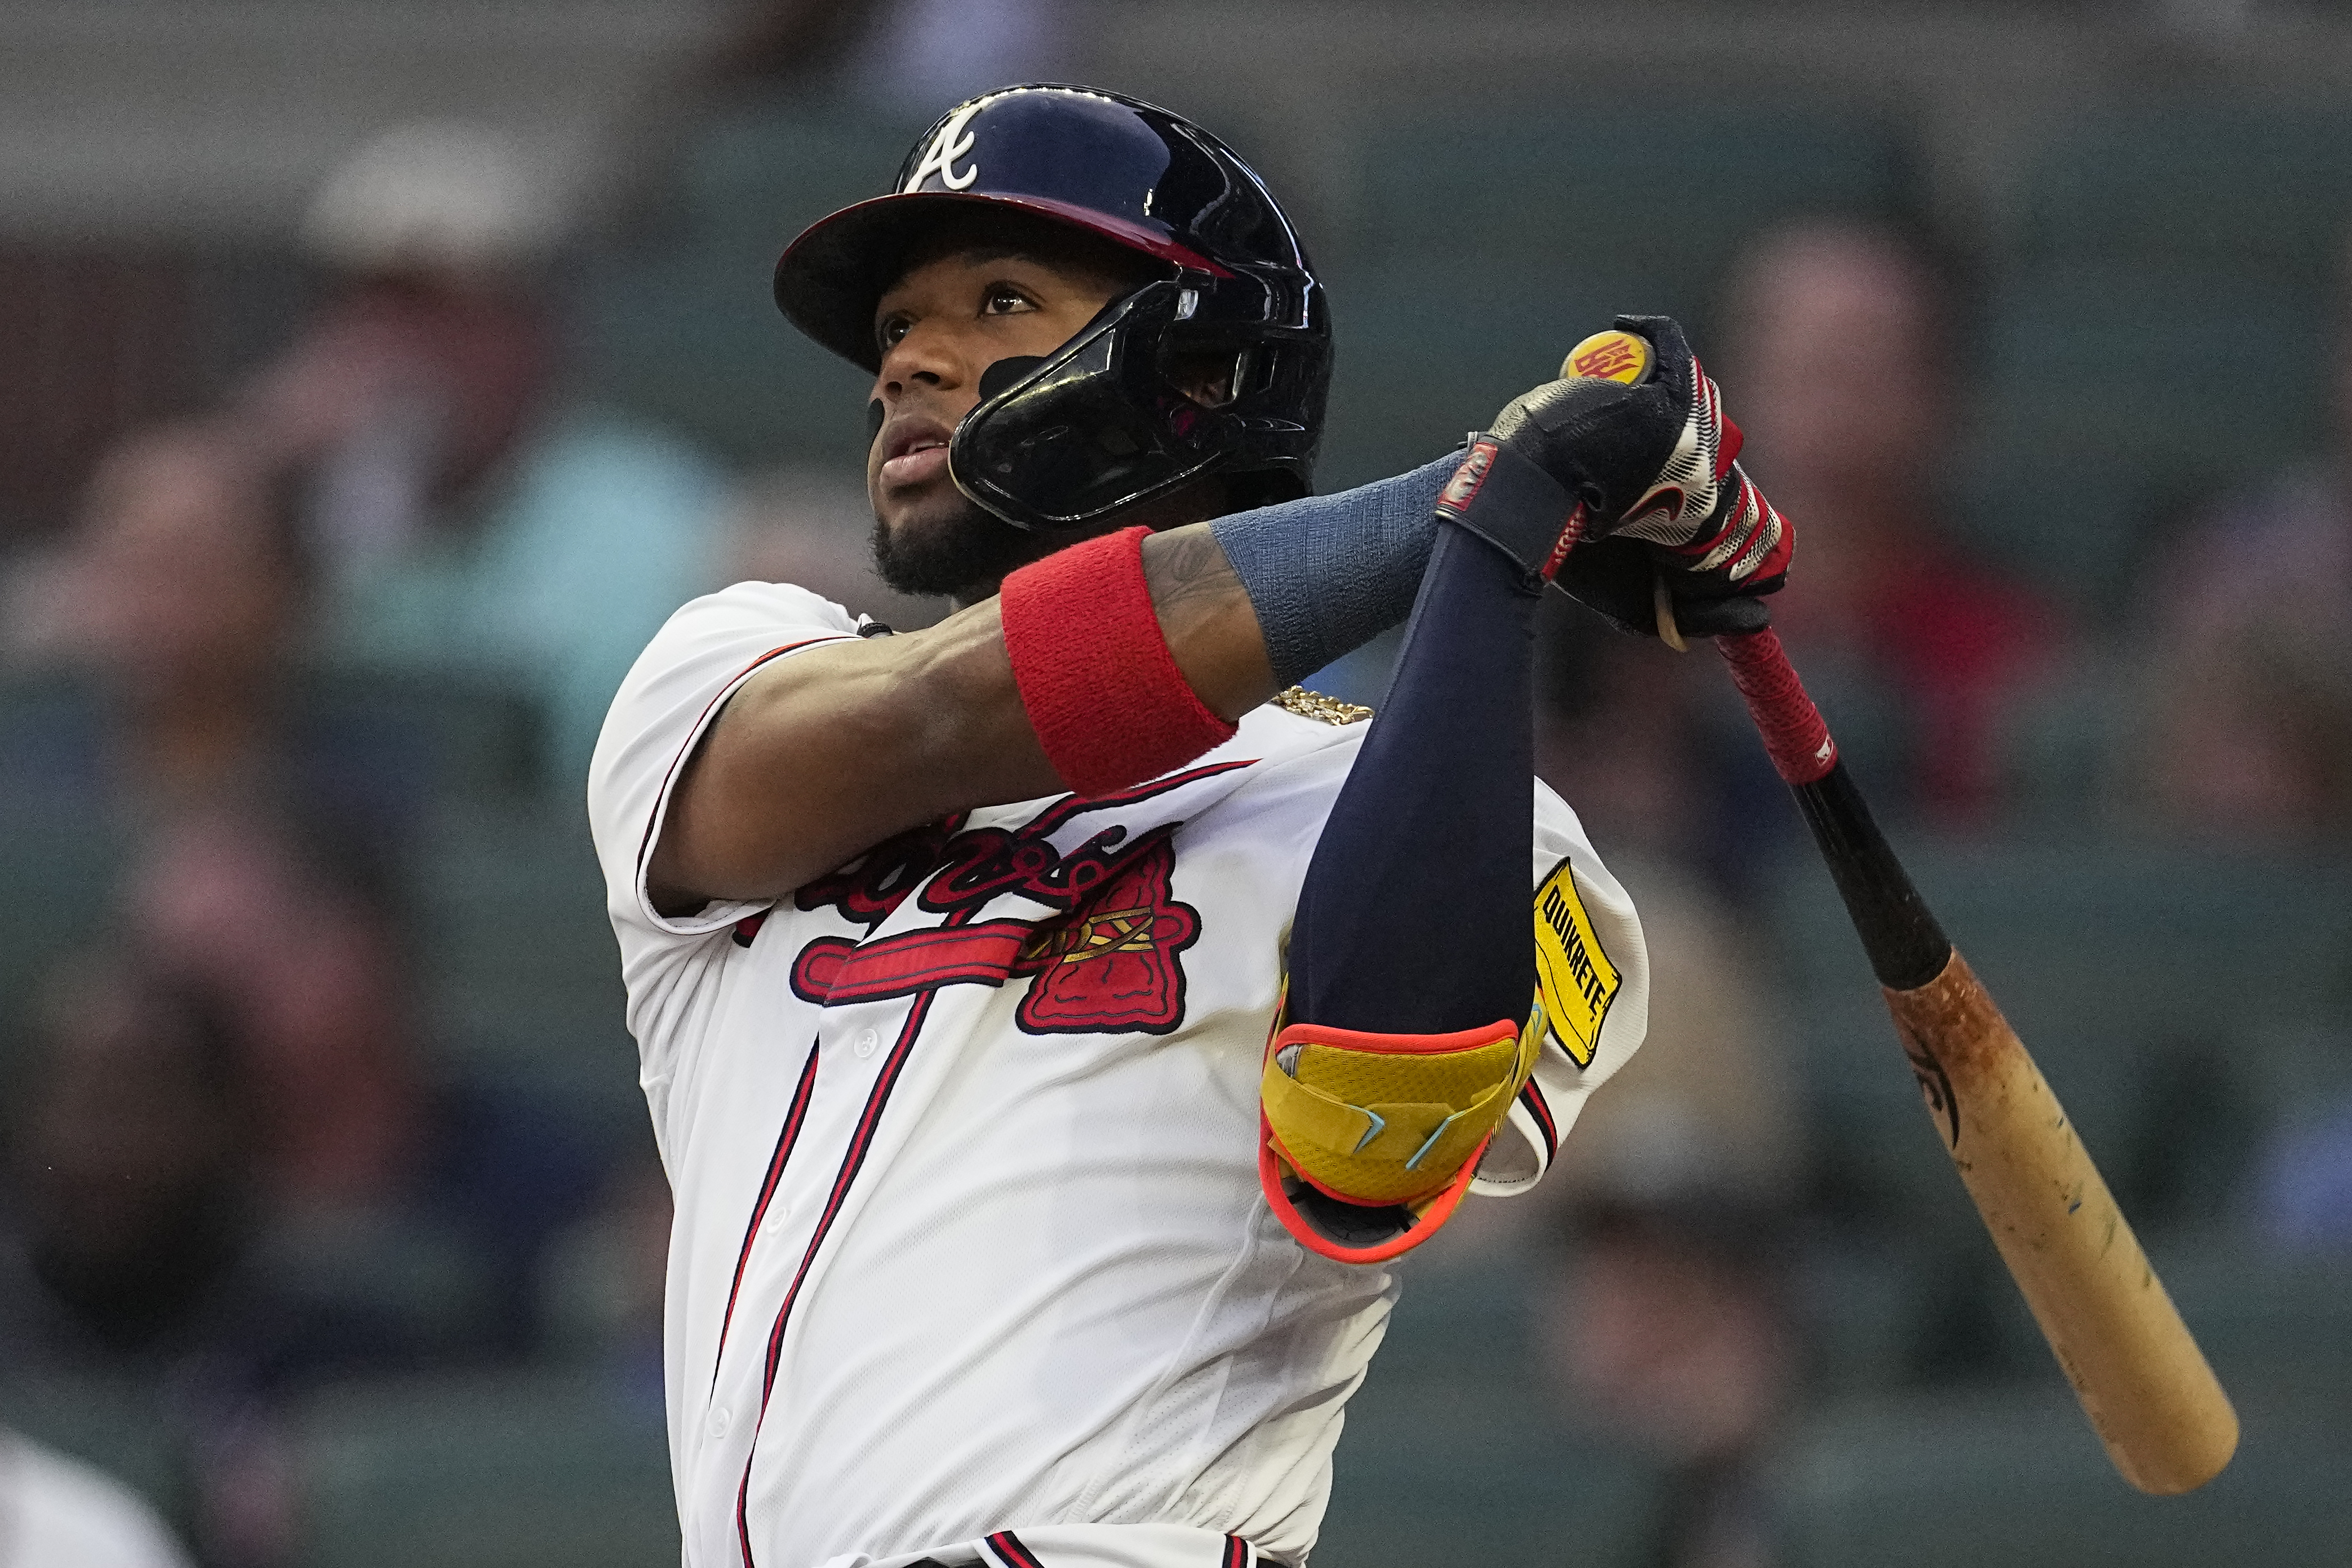 Braves star Ronald Acuña Jr. gets chance to really shine in playoffs